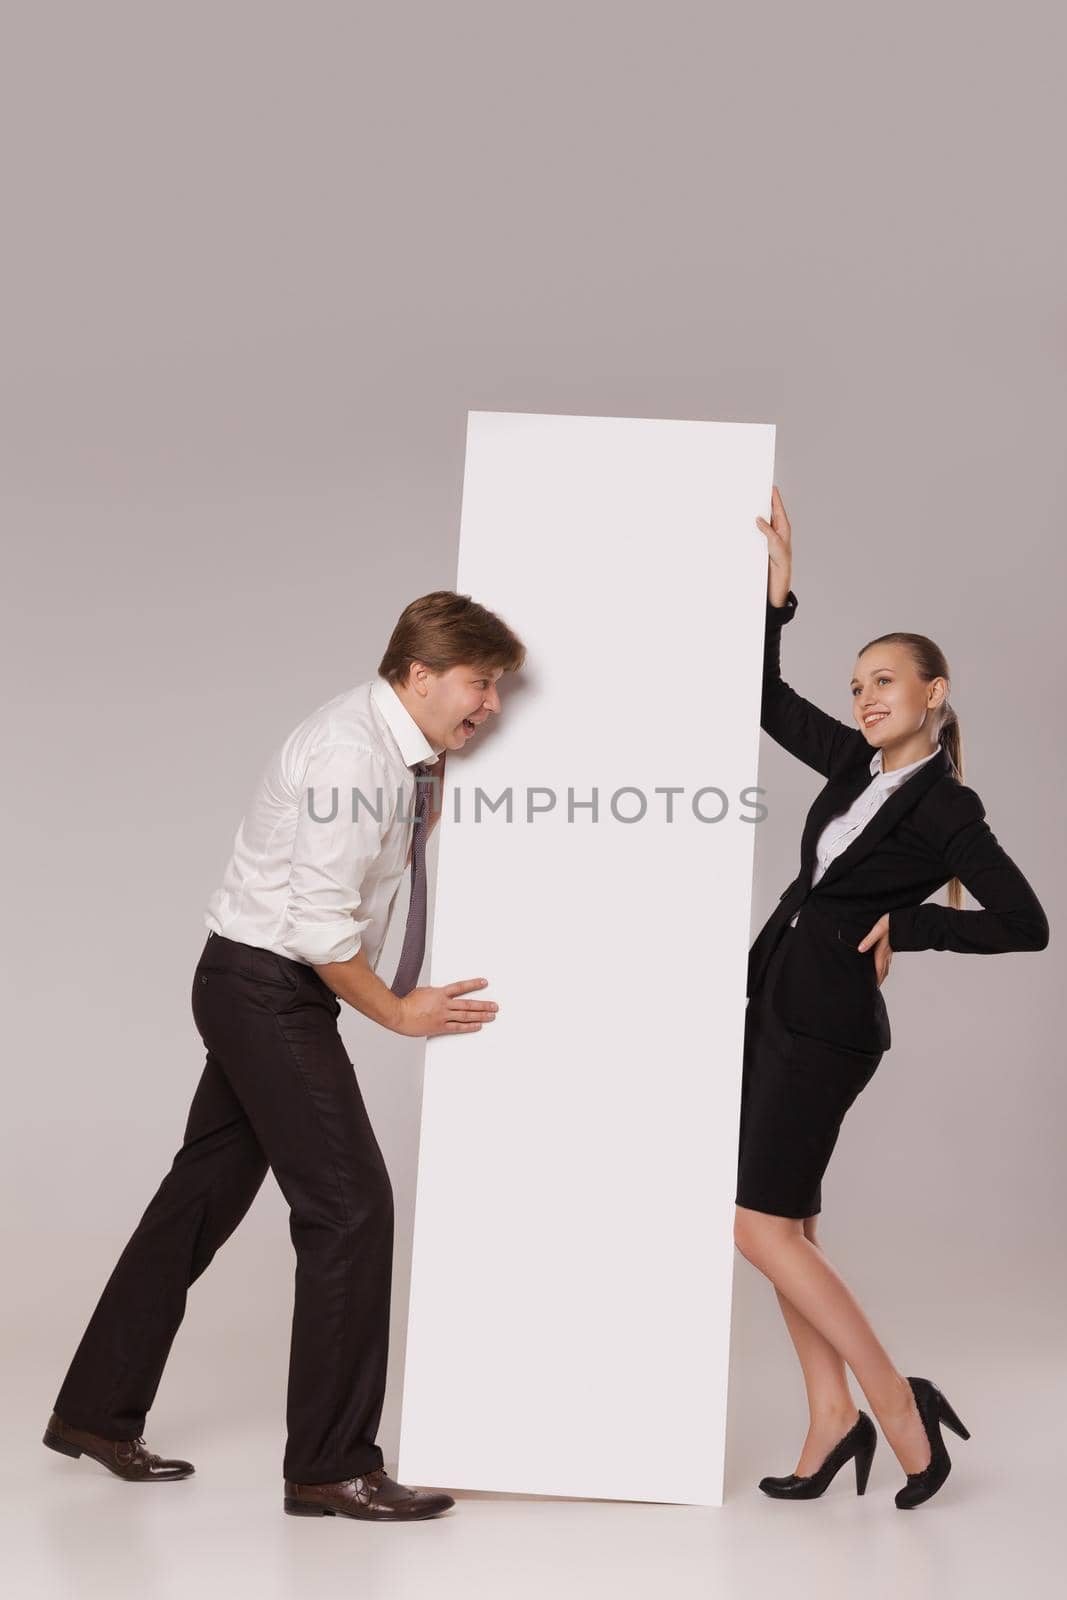 Business man and woman standing on both sides of blank banner the man pushing the banner. isolated on grey background. Teamwork concept